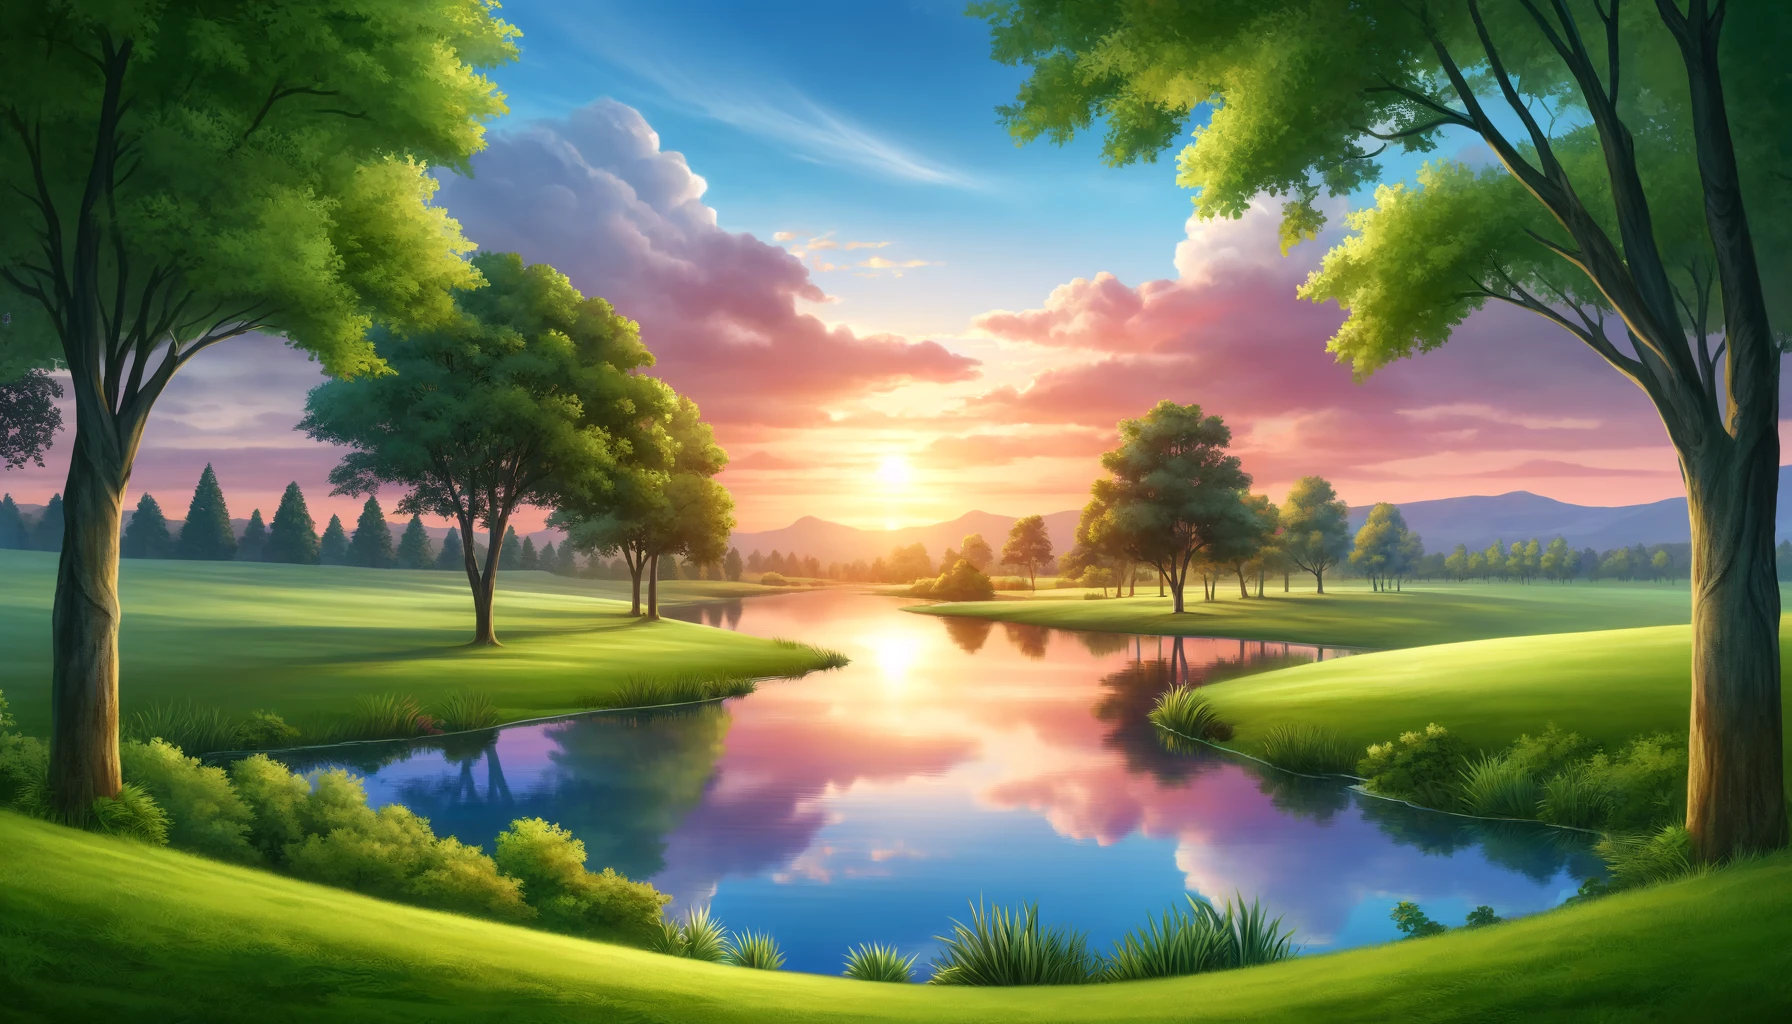 Galtci Serene Landscape Featuring A Peaceful Scene Of A Sunset Over A Calm Lake With R